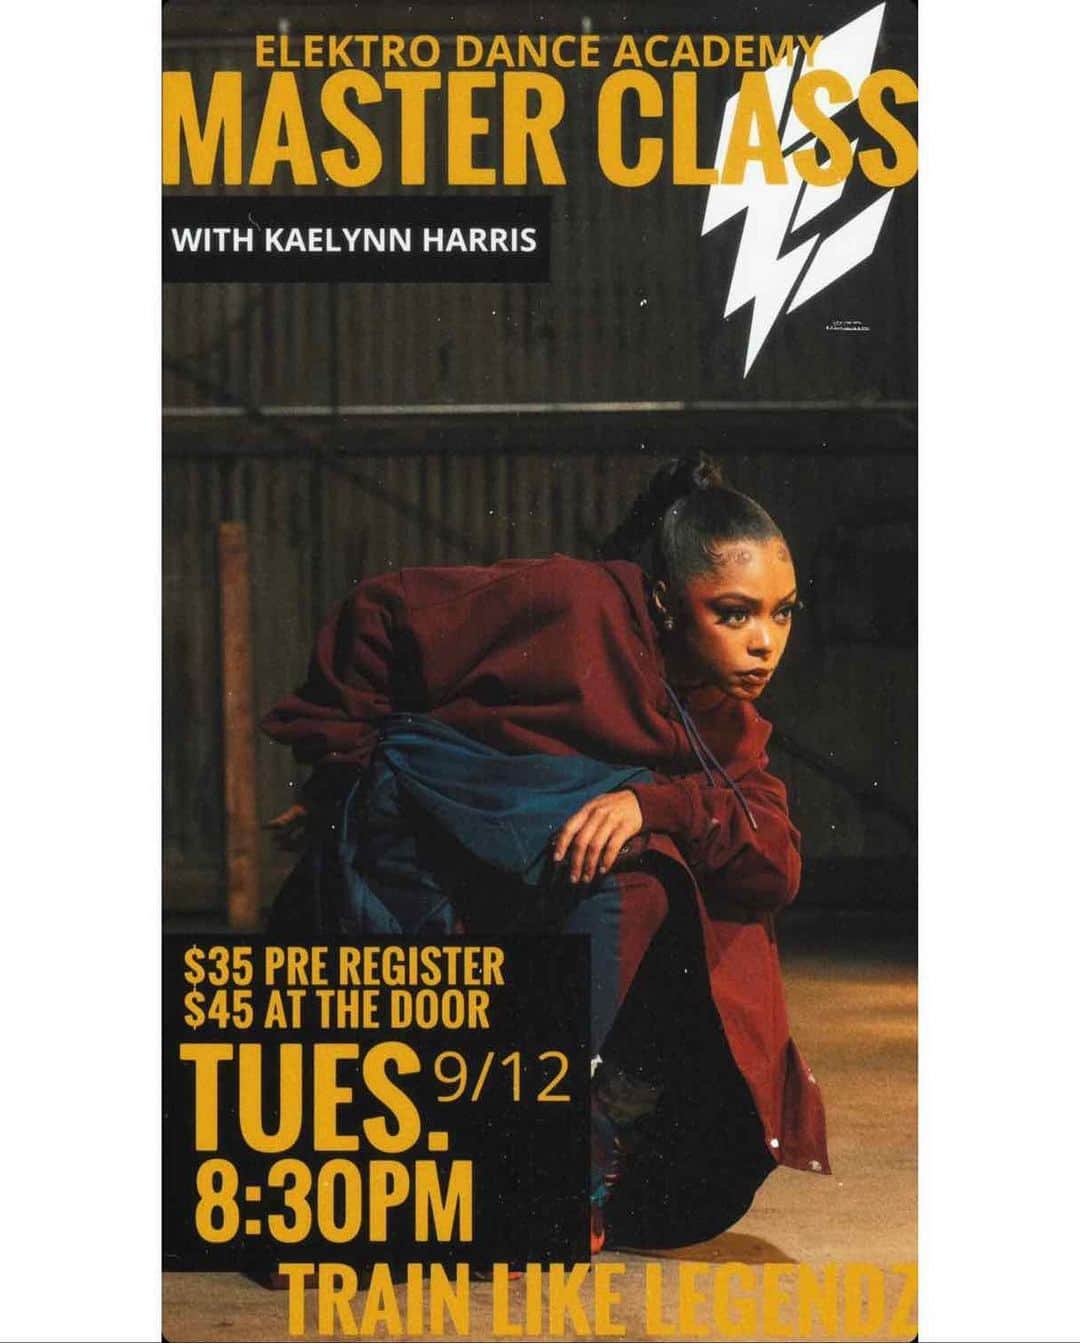 Kaelynn KK Gobert-Harrisのインスタグラム：「I have a few upcoming classes in September!  Here are two options to train with me if you’re in the area 💕  I’ll be posting more dates and locations throughout the week!  There are more cities in my story too, if you wanna slide on that.  You can register directly with these studios  Phoenix - @elektrodanceacademy  Tulsa - @mofcrew_」